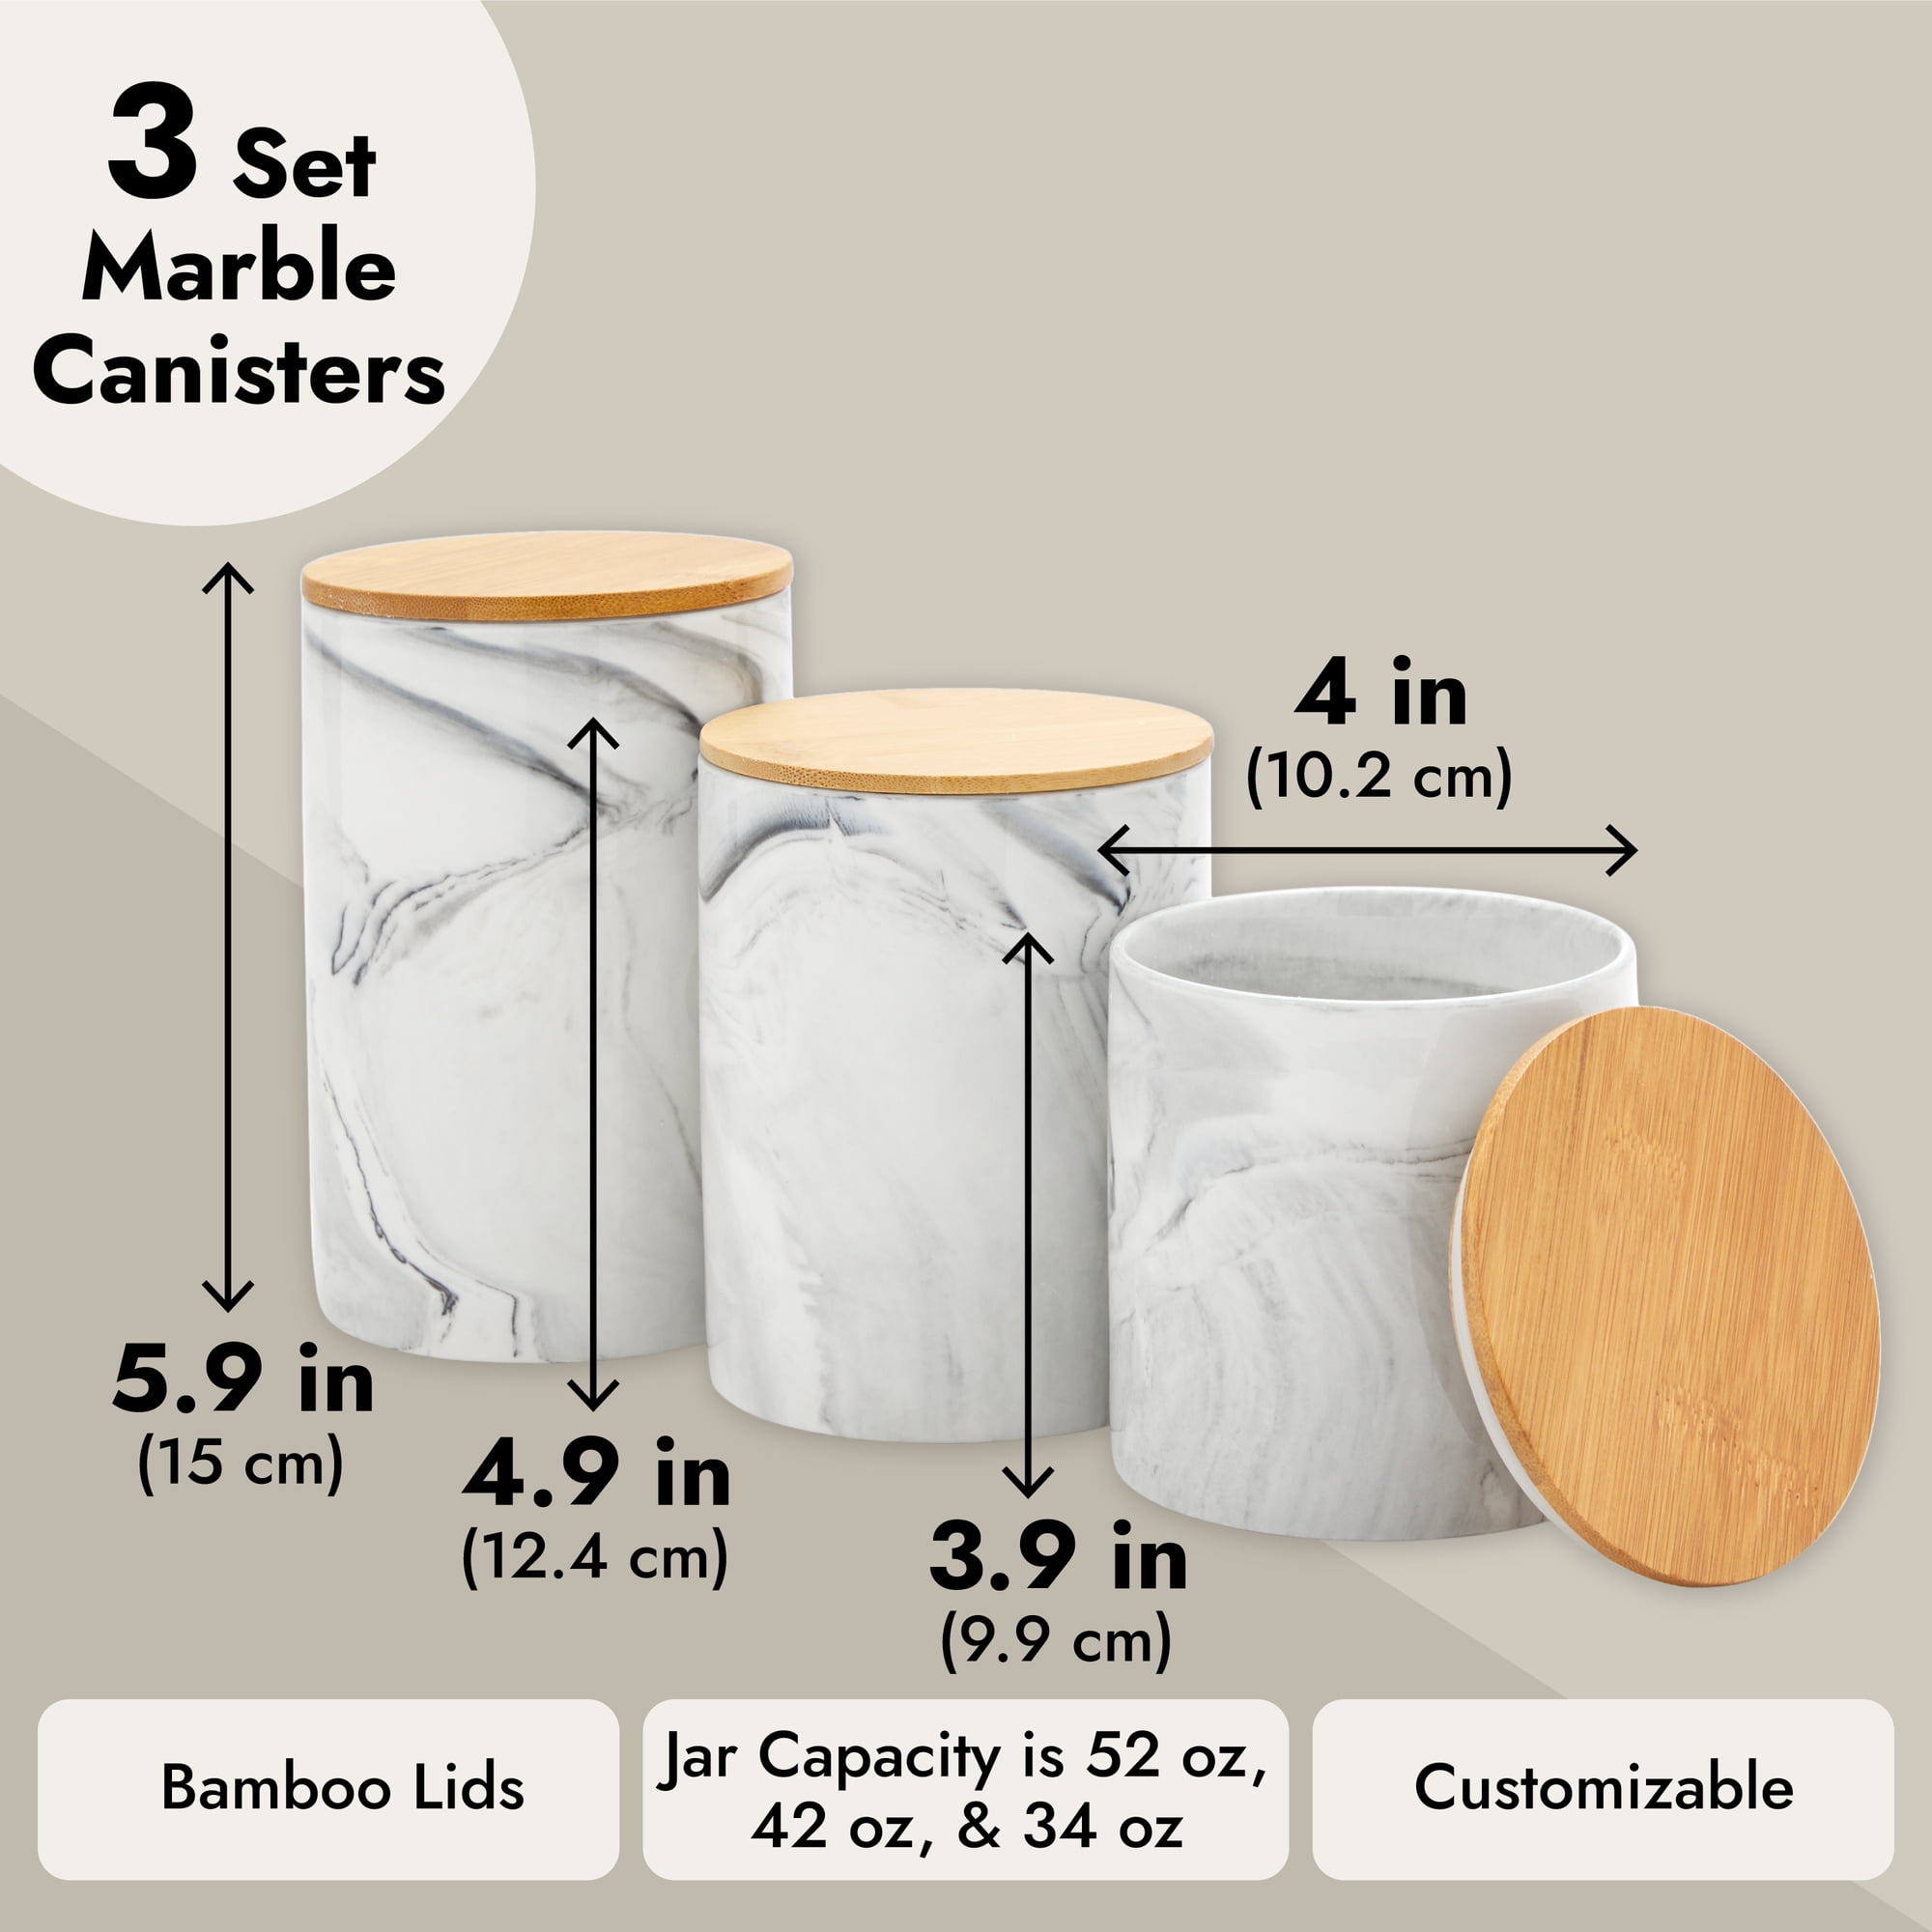 Williams Ceramic Canisters - Set of 3, Kitchen Counter Organizers